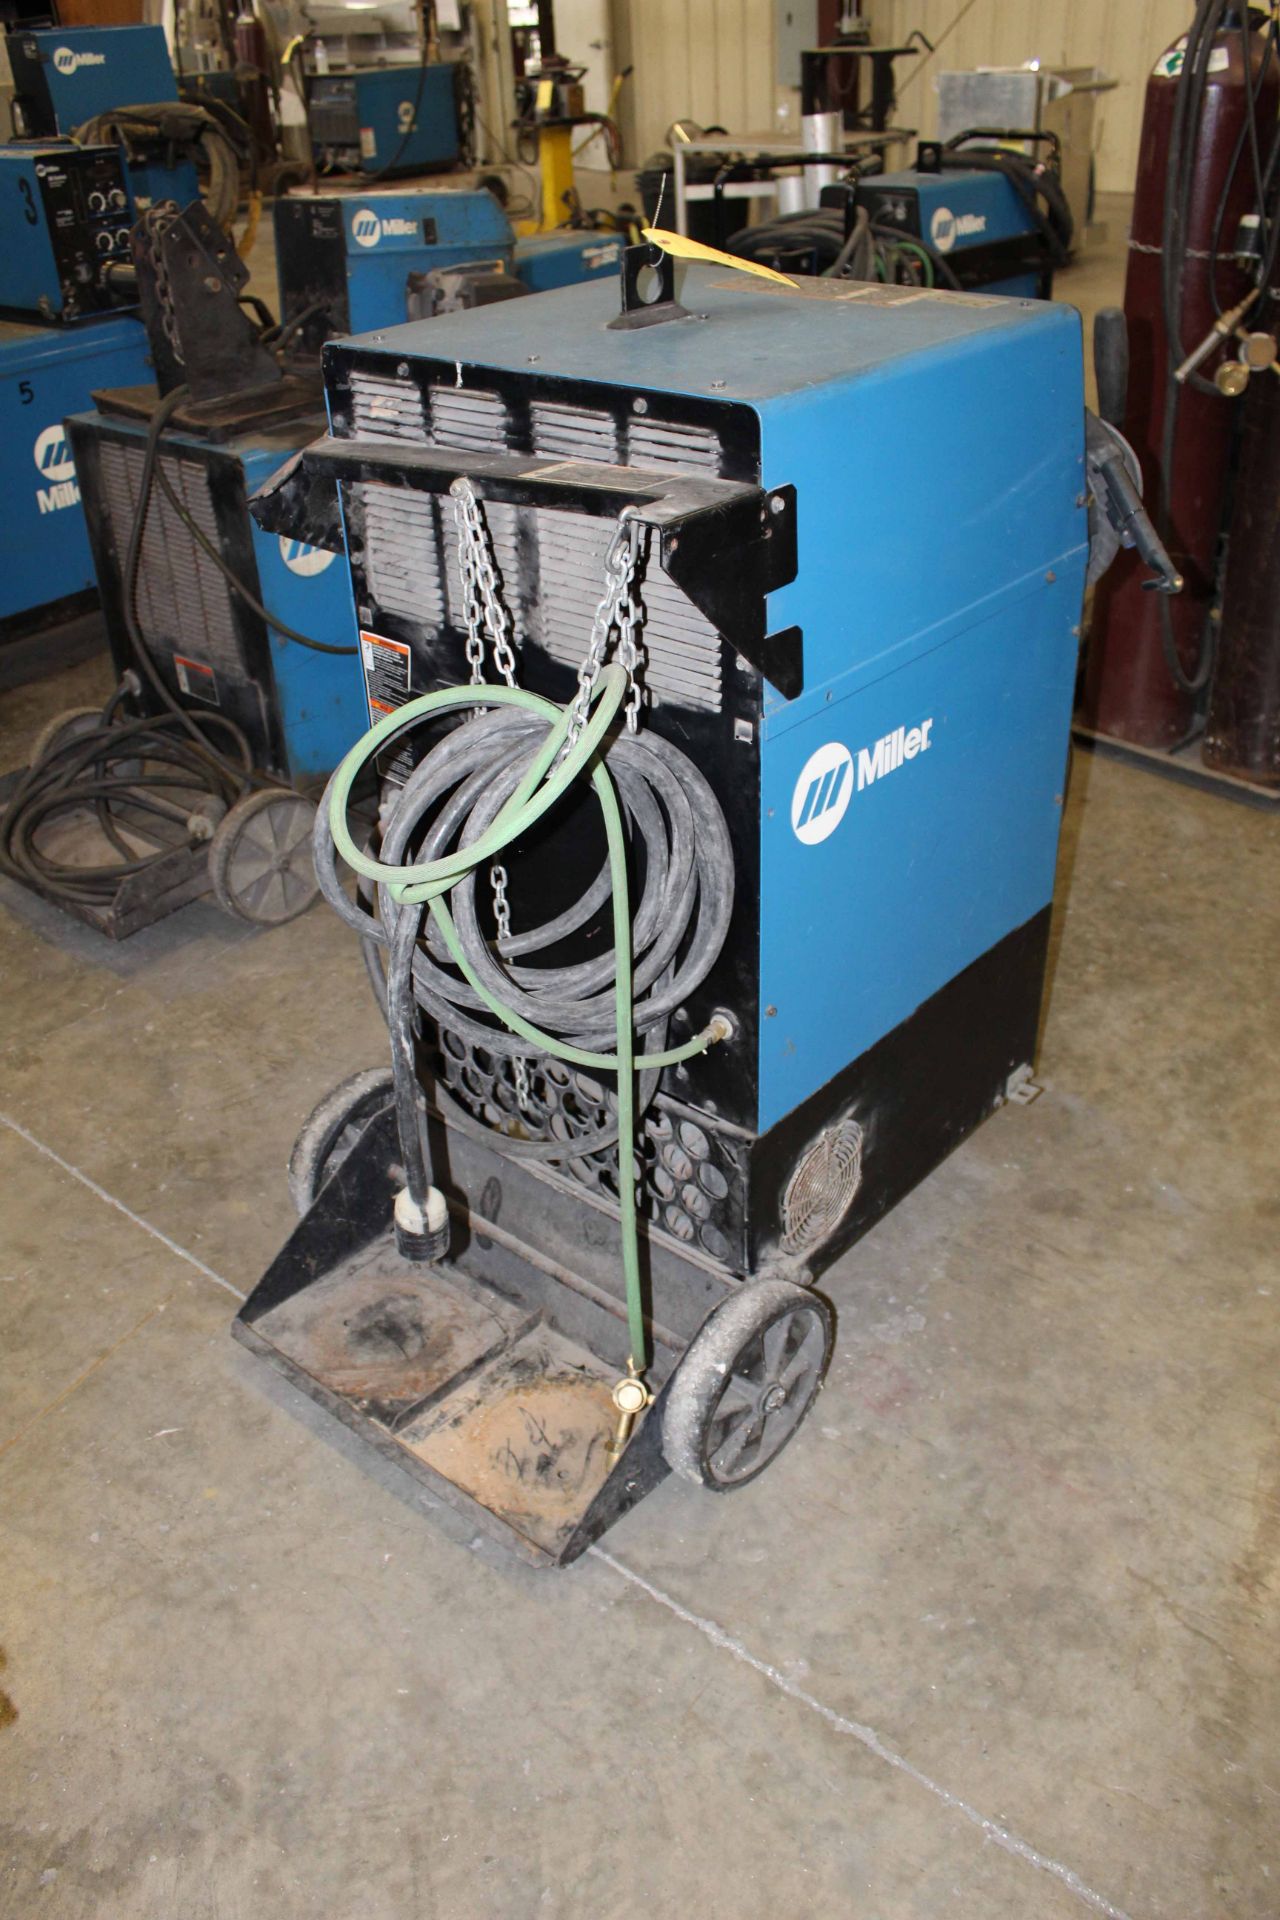 WELDING MACHINE, MILLER SYNCROWAVE 250DX, new 2012, S/N MC010207L - Image 3 of 3